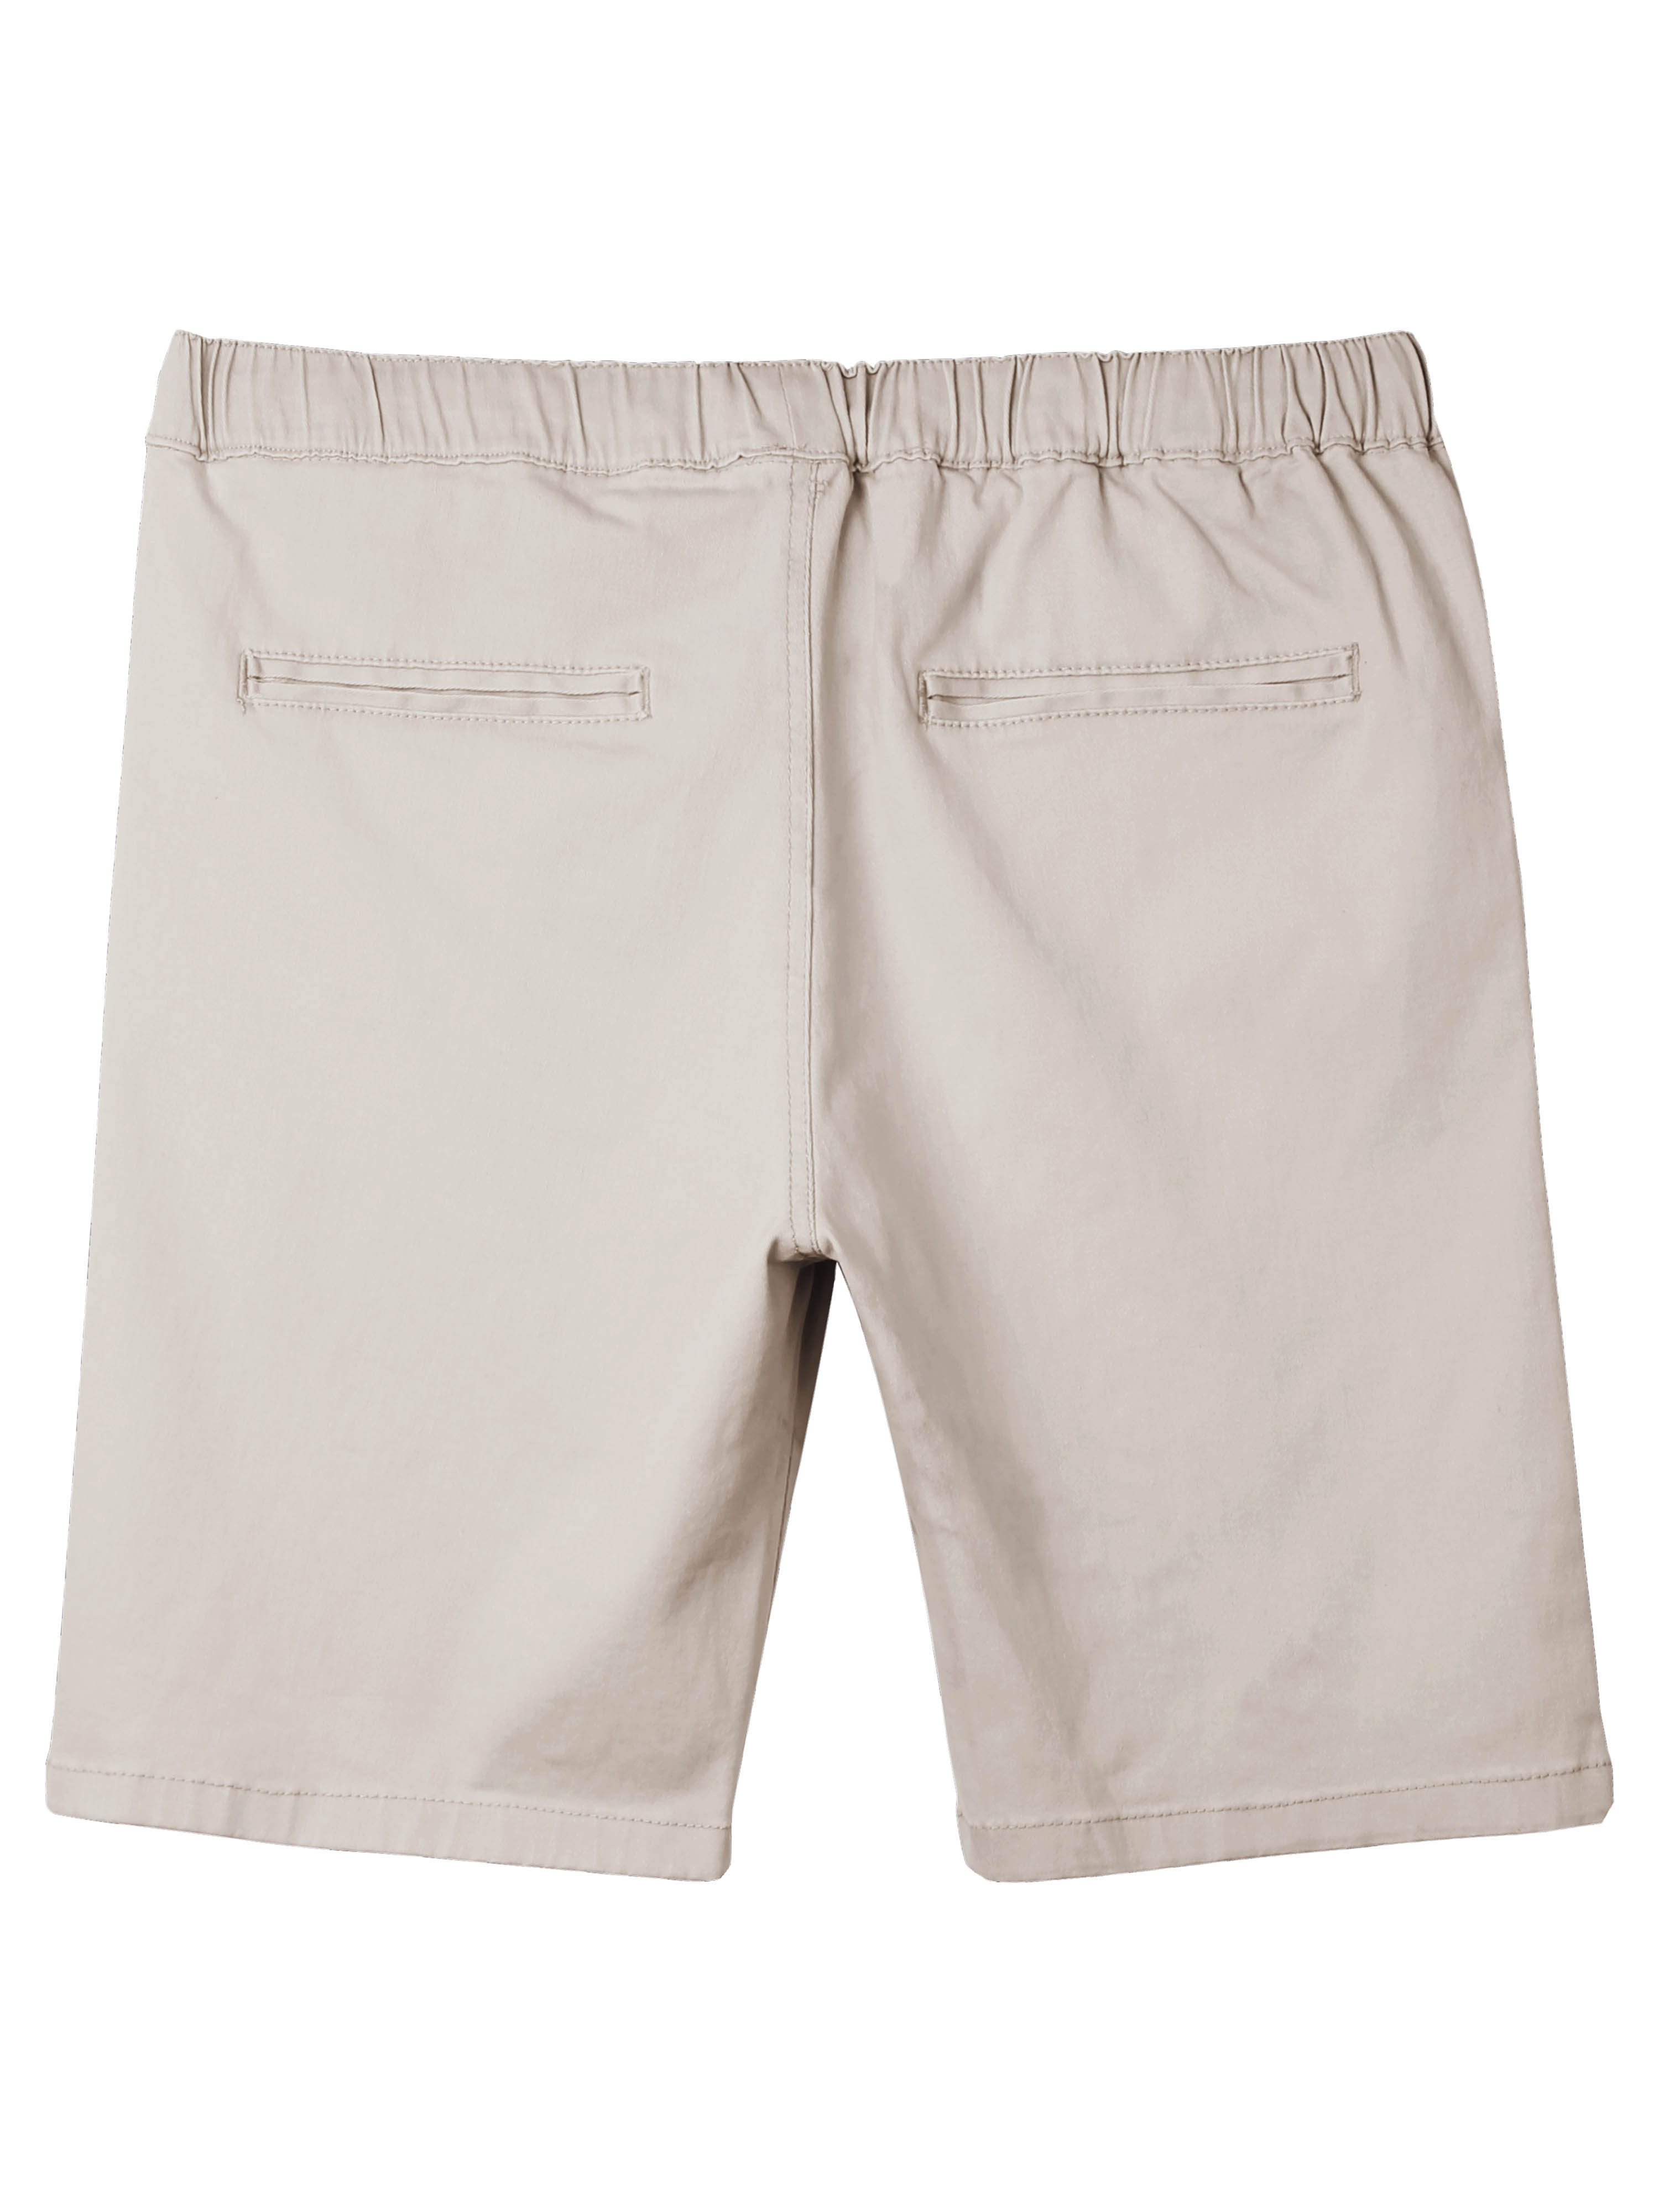 Ma Croix Men's Flat Front Summer Casual Twill Classic Slim Fit Cotton Shorts - image 5 of 6